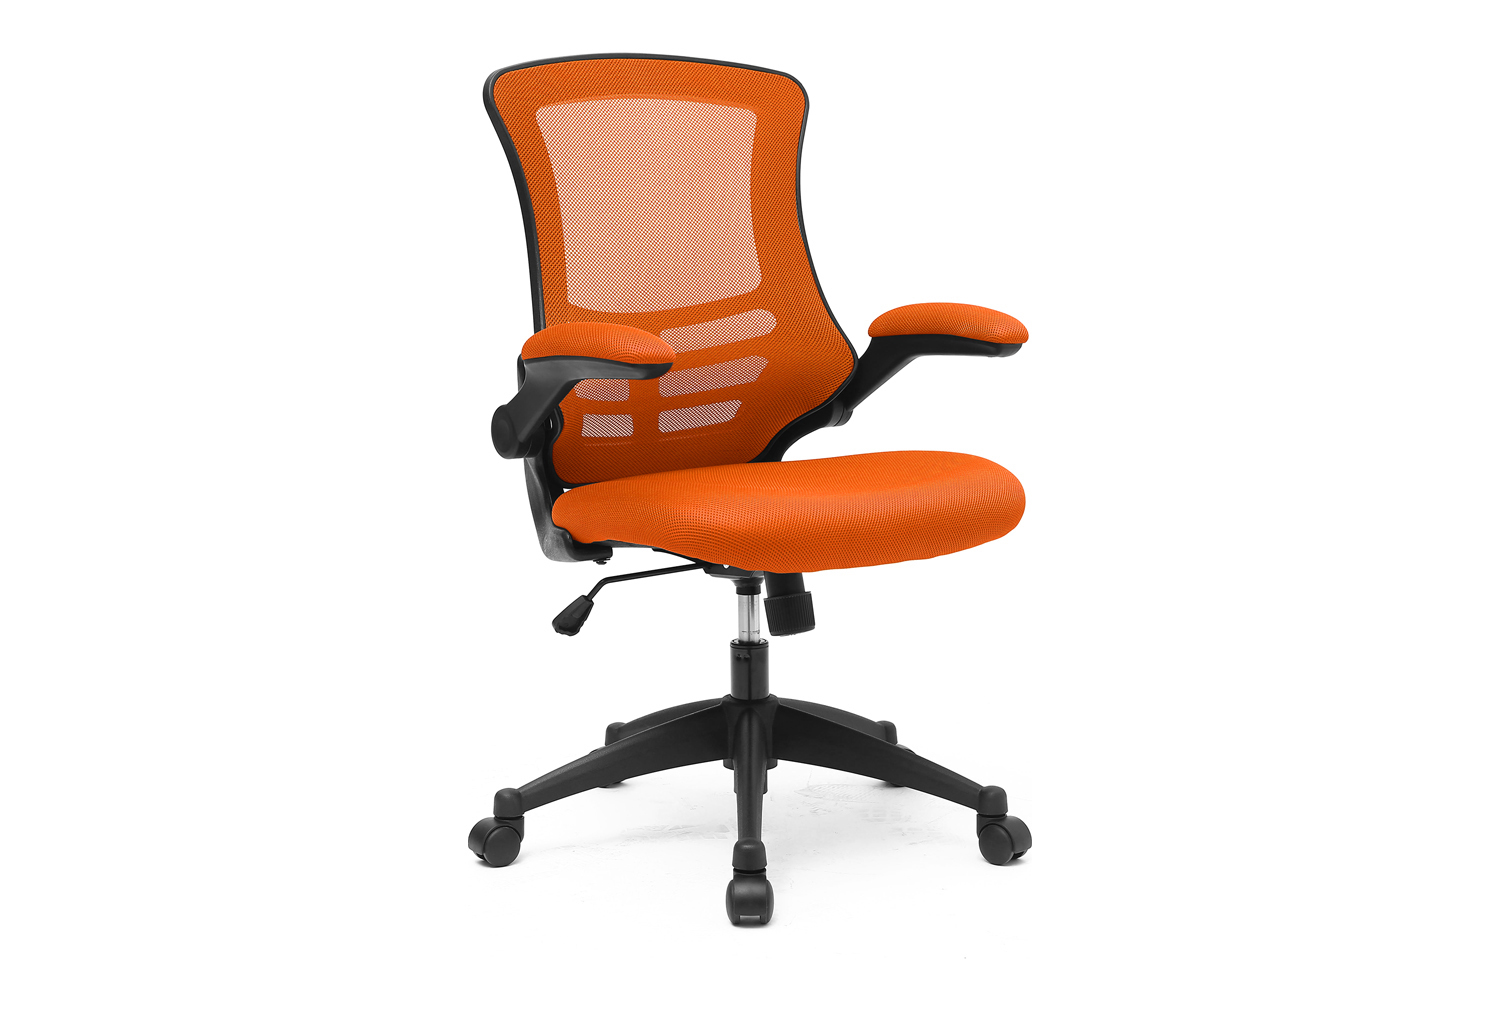 Moon Mesh Back Operator Office Chair With Black Base (Orange), Express Delivery